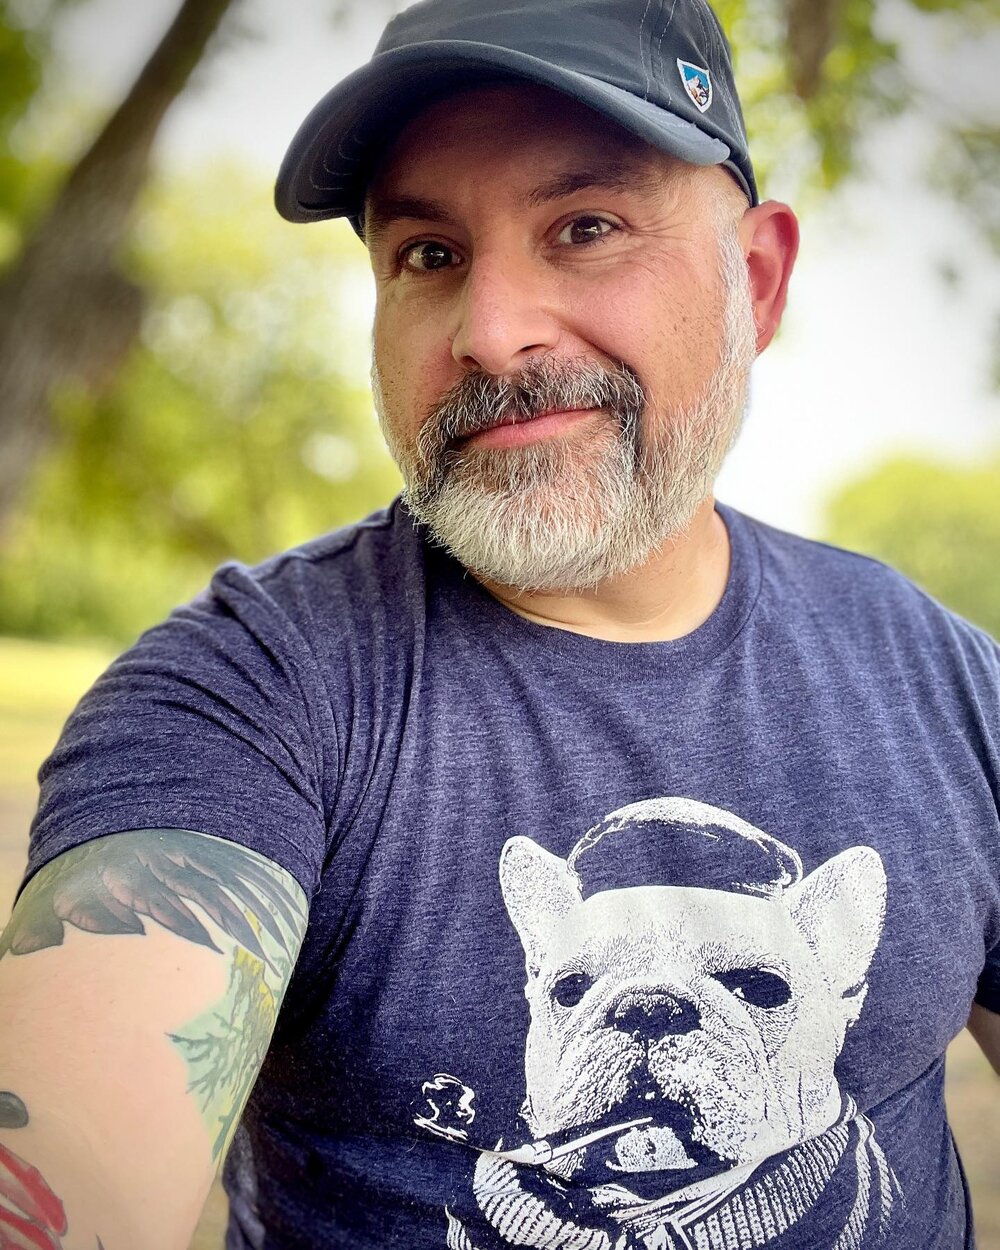 The badass Frenchie smoking a pipe on my shirt is my vibe today.  Do what I need to do and what I wanna do - with confidence and belief in myself. 

Awesome workout today at the gym and additional exercise at the park.  Swim time and a healthy dinner